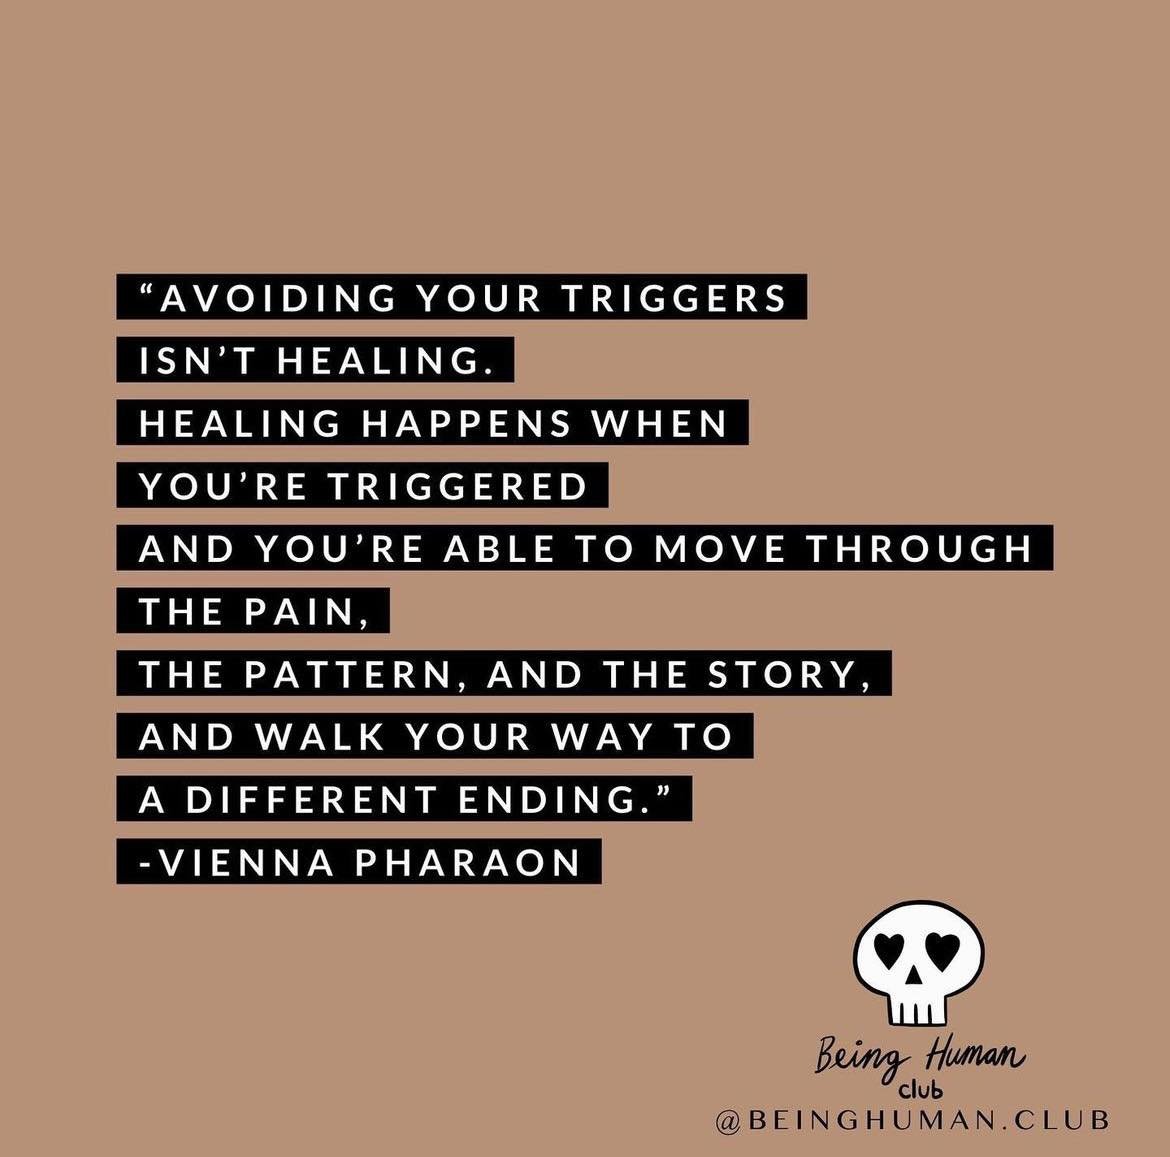 Sometimes feeling triggered can provide an opportunity to choose a different outcome. 
.
.
.

#beinghumanclubyyc #yycpsychology #mindset #selfreflection #mentalhealth #yyccounselling #selfdevelopment #motivation #yyctherapy #mindfulness #dbt #yycther